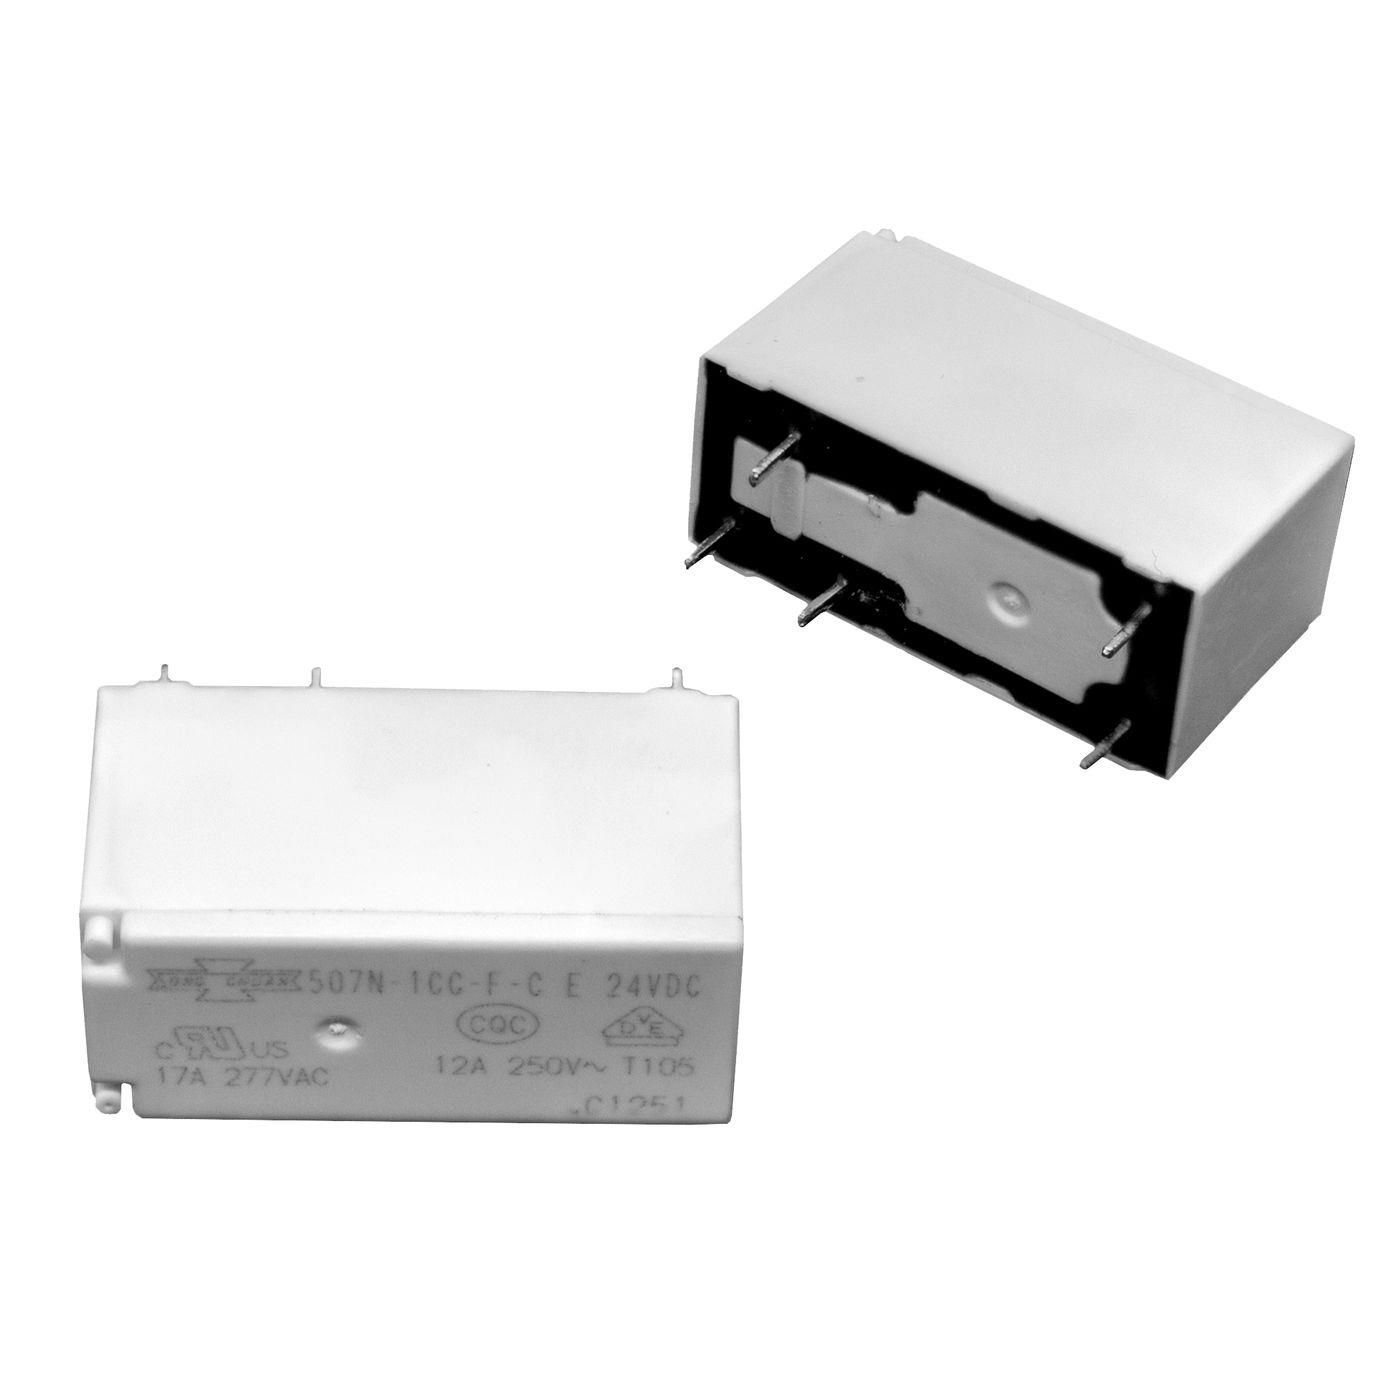 Print Relay 24V Song Chuan 507N-1CC-F-CE 24VDC 24VDC 17A 250V Changeover contact